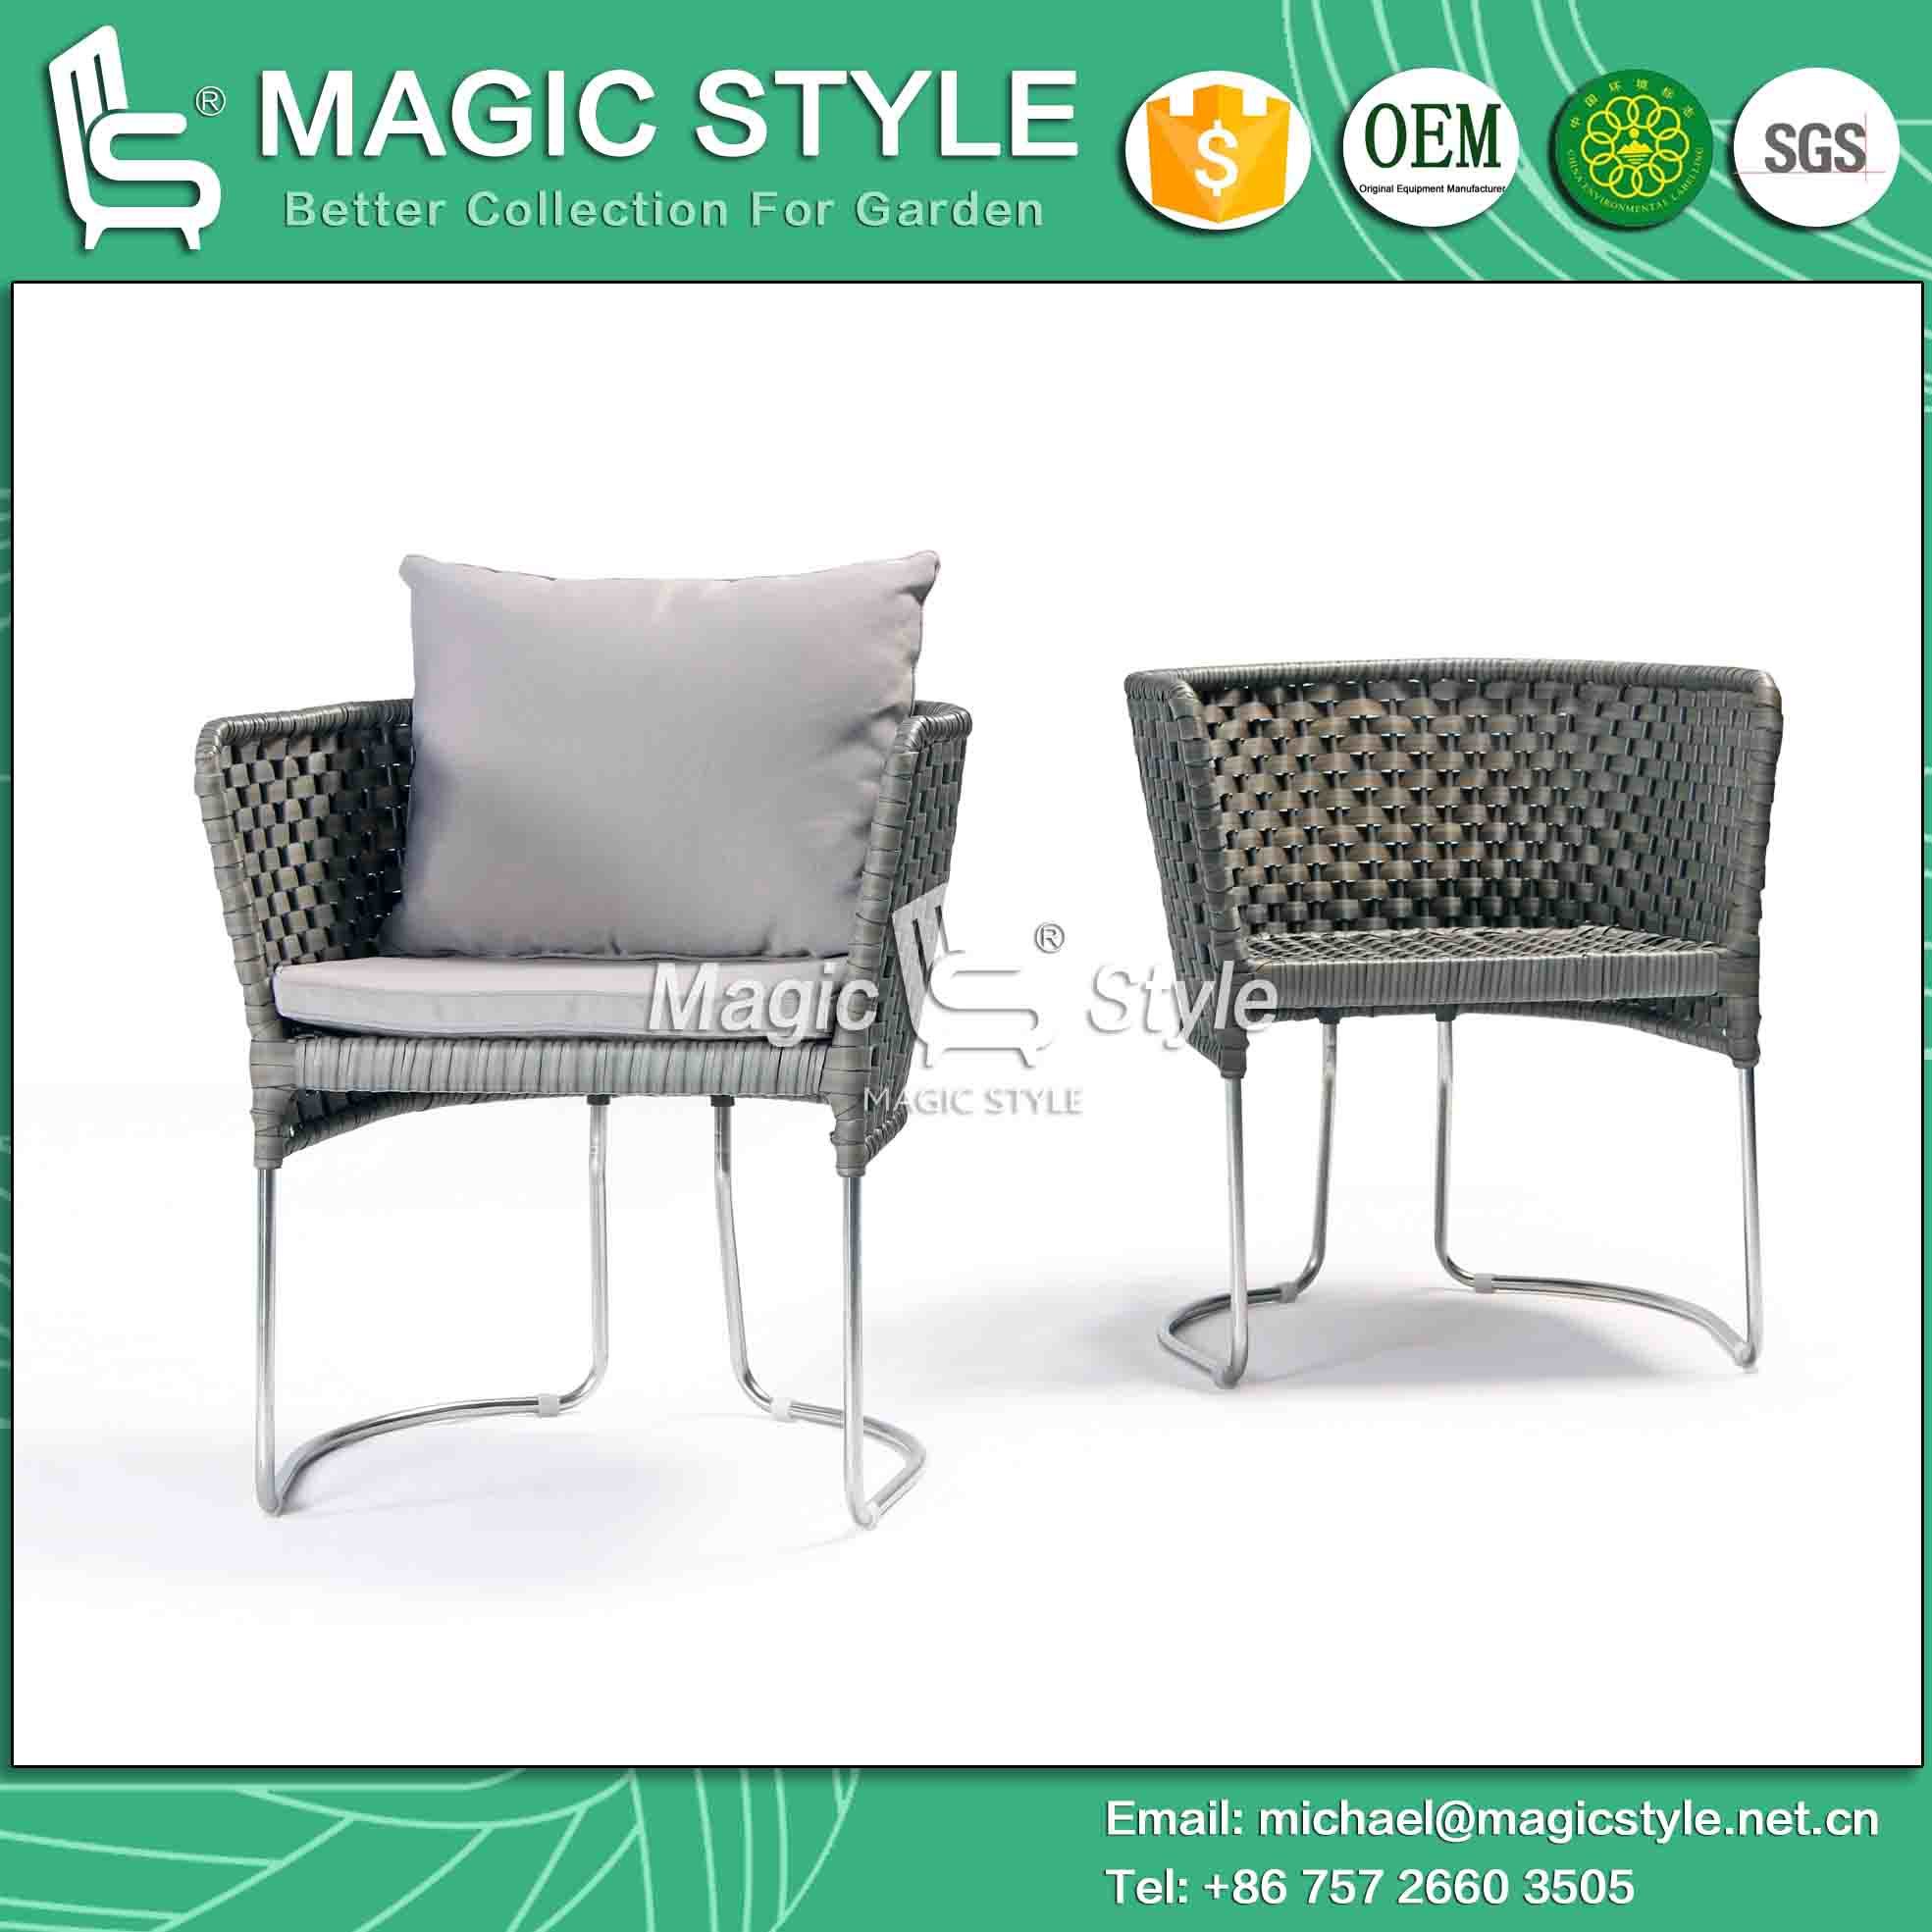 Iris Dining Chair Stainless Steel Chair Dining Chair Garden Furniture (MAGIC STYLE) Patio Chair